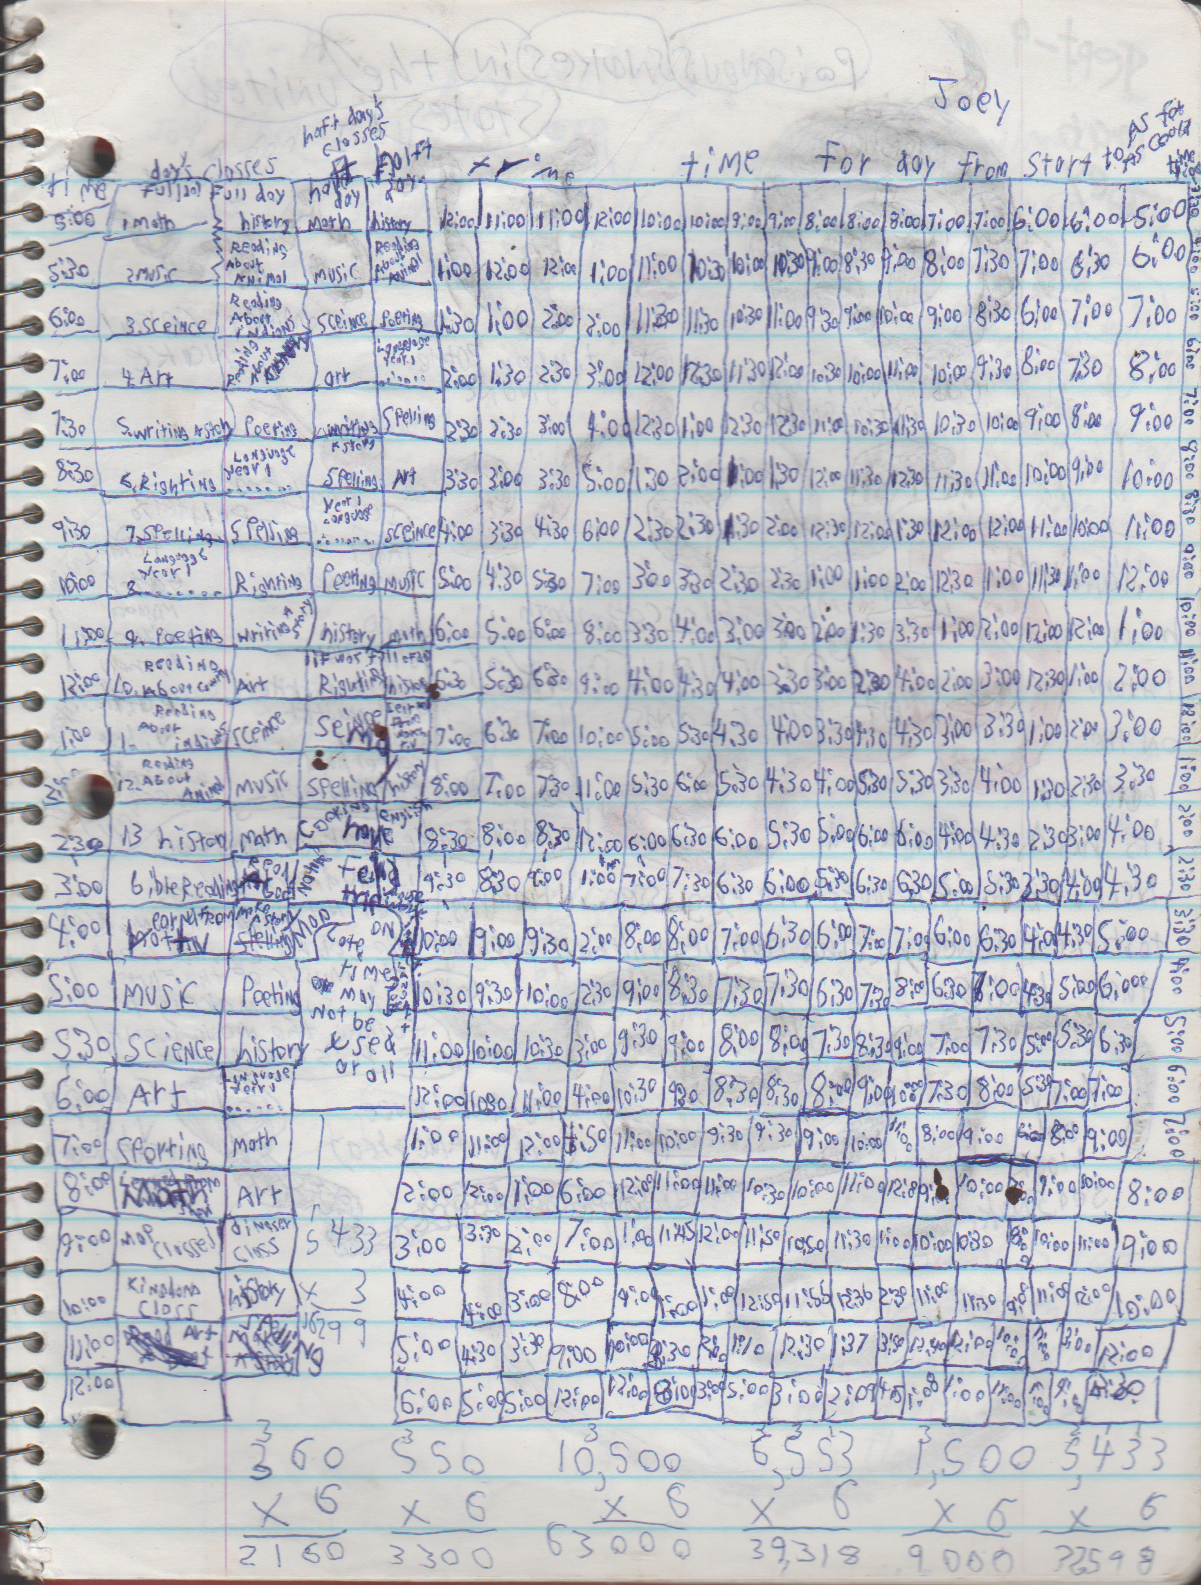 1996-08-18 - Saturday - 11 yr old Joey Arnold's School Book, dates through to 1998 apx, mostly 96, Writings, Drawings, Etc-003 ok.png